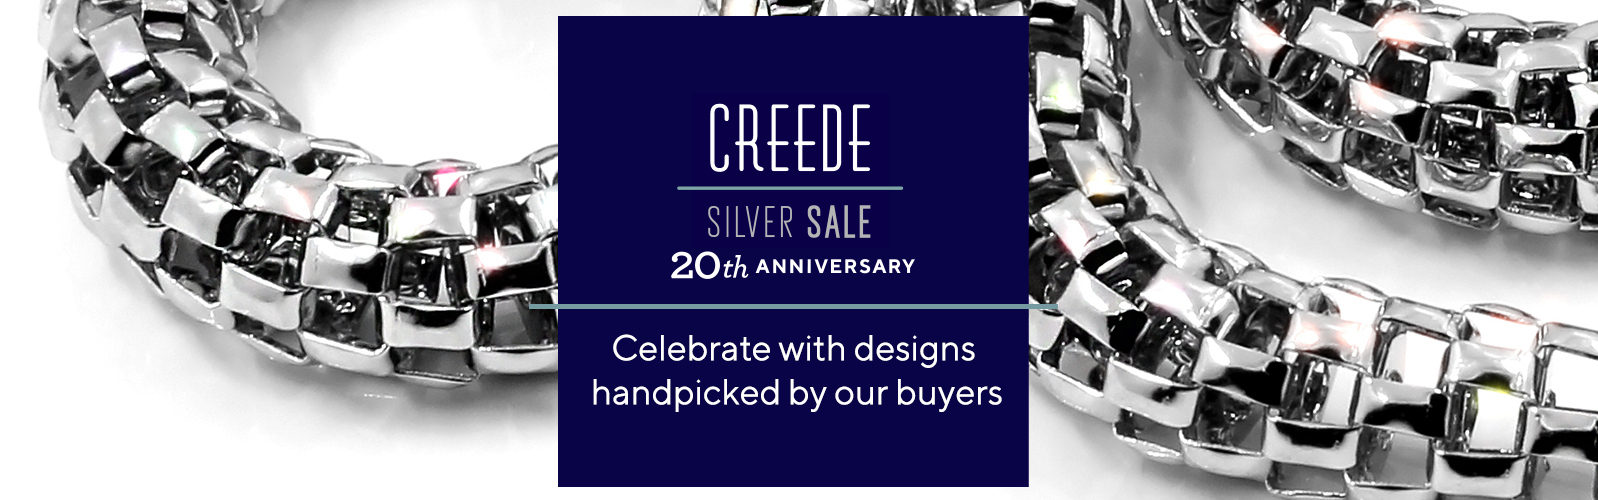 Creede Silver Sale 20th Anniversary.  Celebrate with designs handpicked by our buyers.